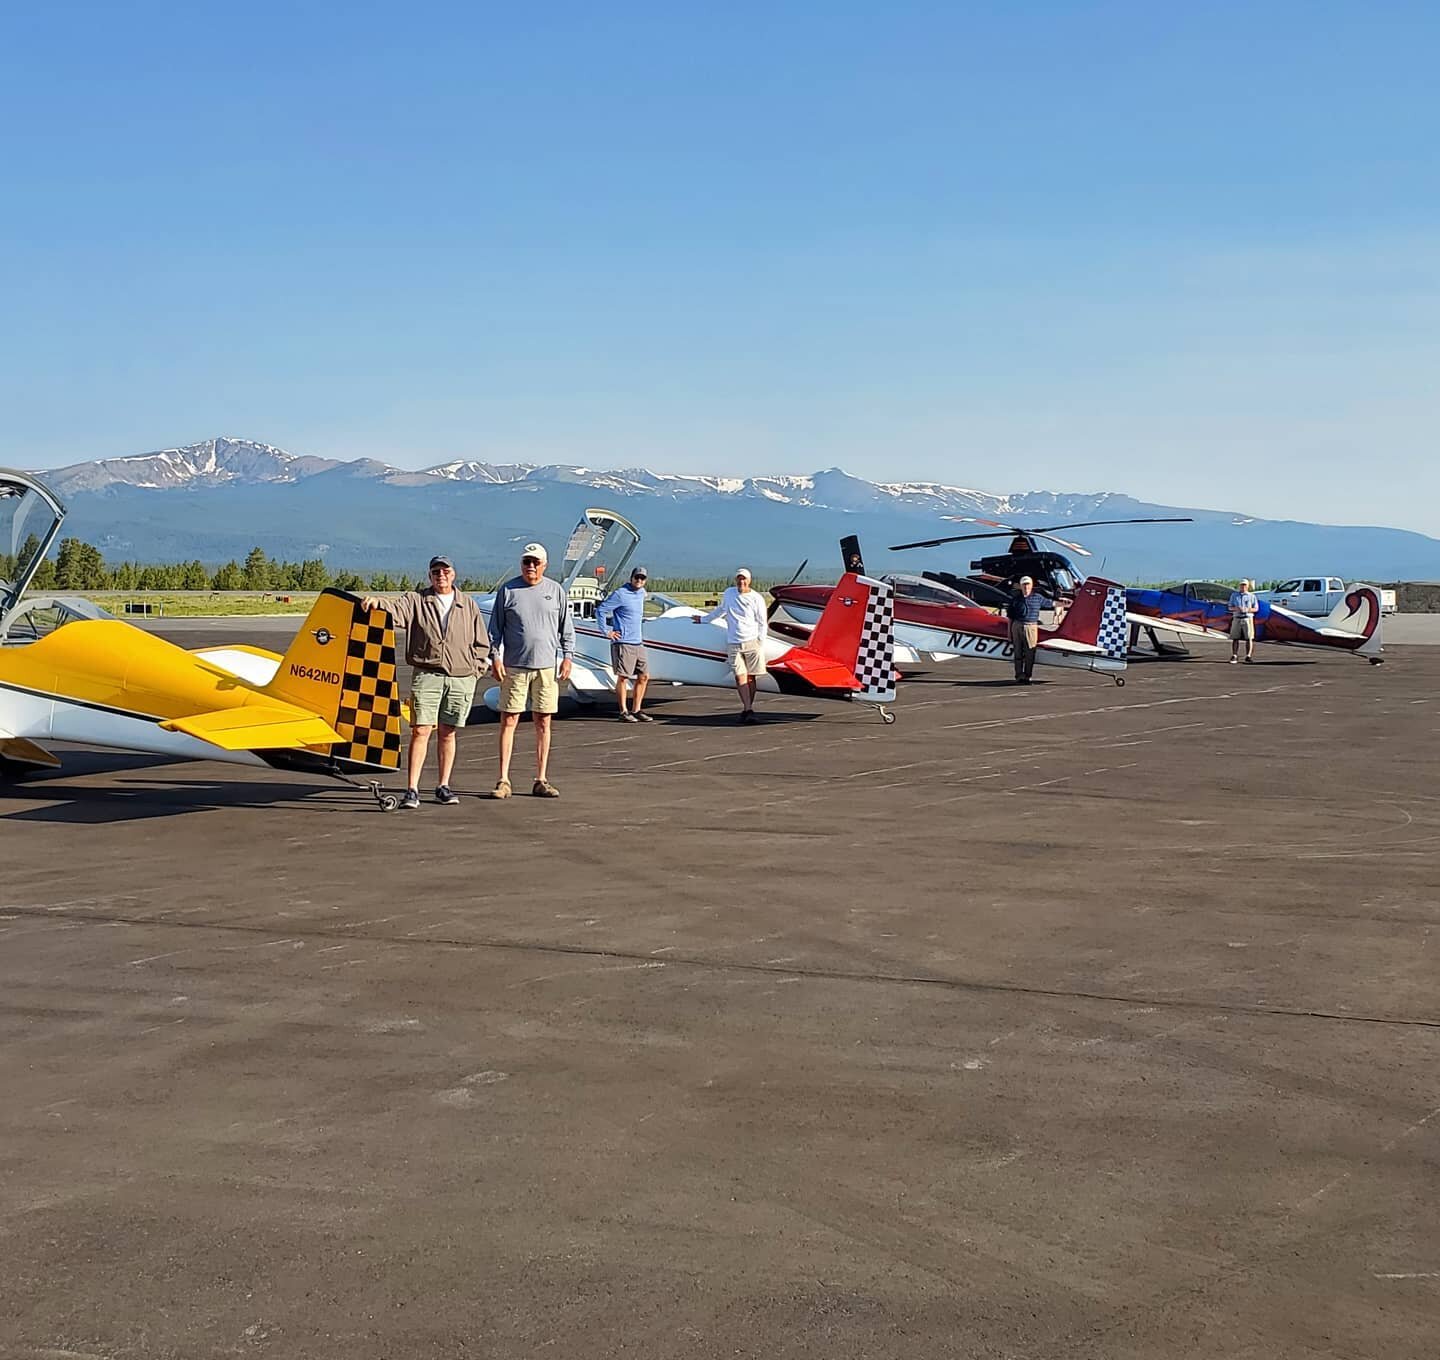 Thursday is RV day.  This crew was on a multi state tour originating from Georgia!

#airplane #airport #leadville #lxv9934 #colorado
#mountainflying #rockymountains